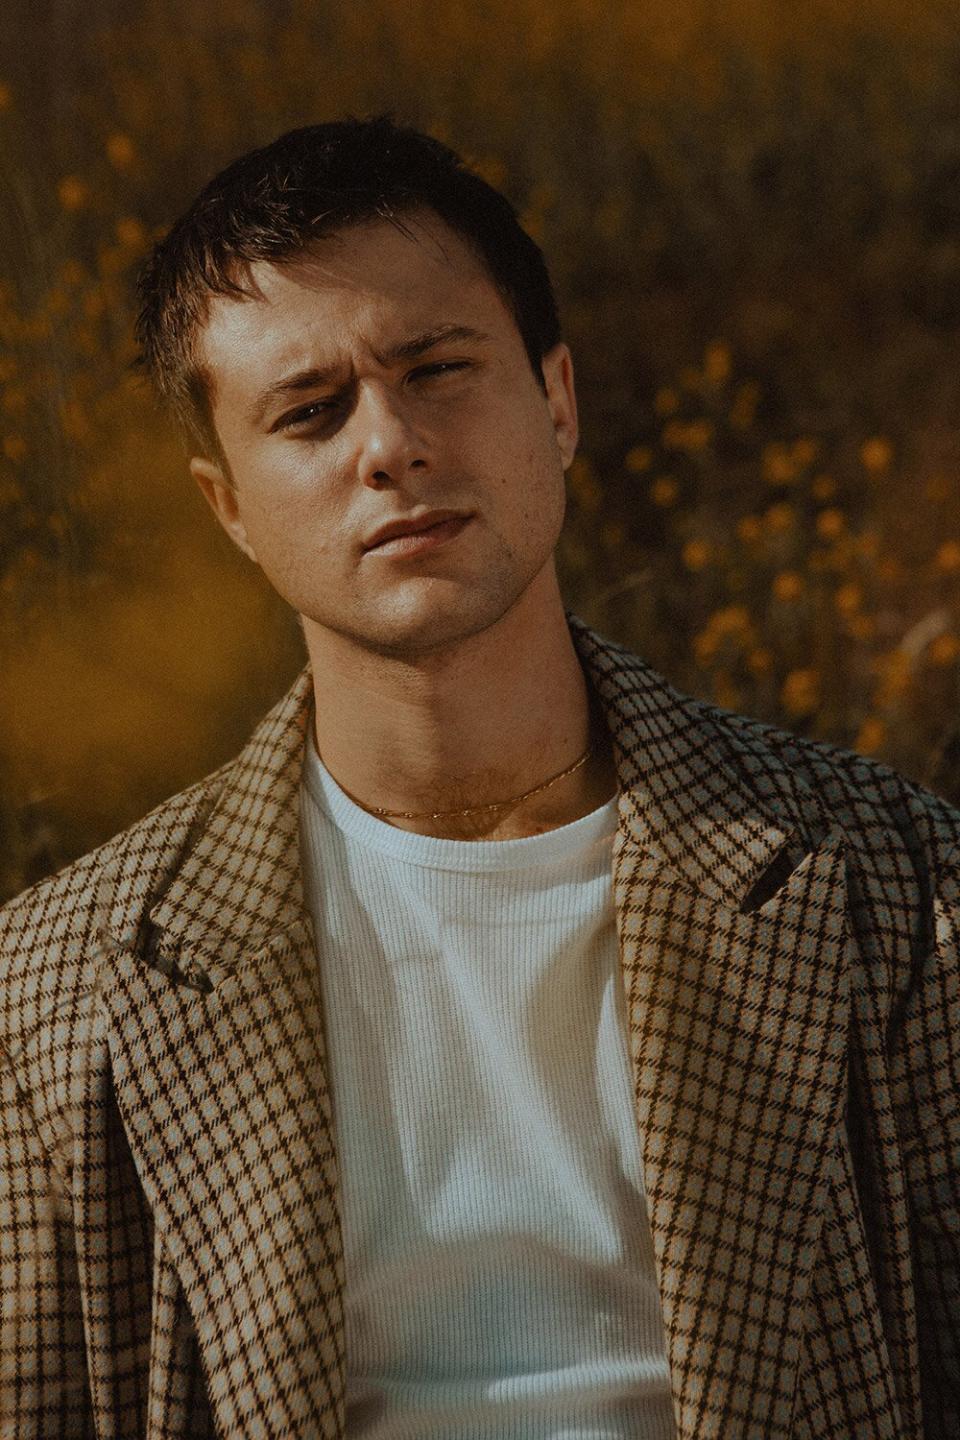 Alec Benjamin Interview  Can we tool? Credit for the indoor ones is Connor Gaskey, and credit for the other two outdoor ones is Matty Vogel.